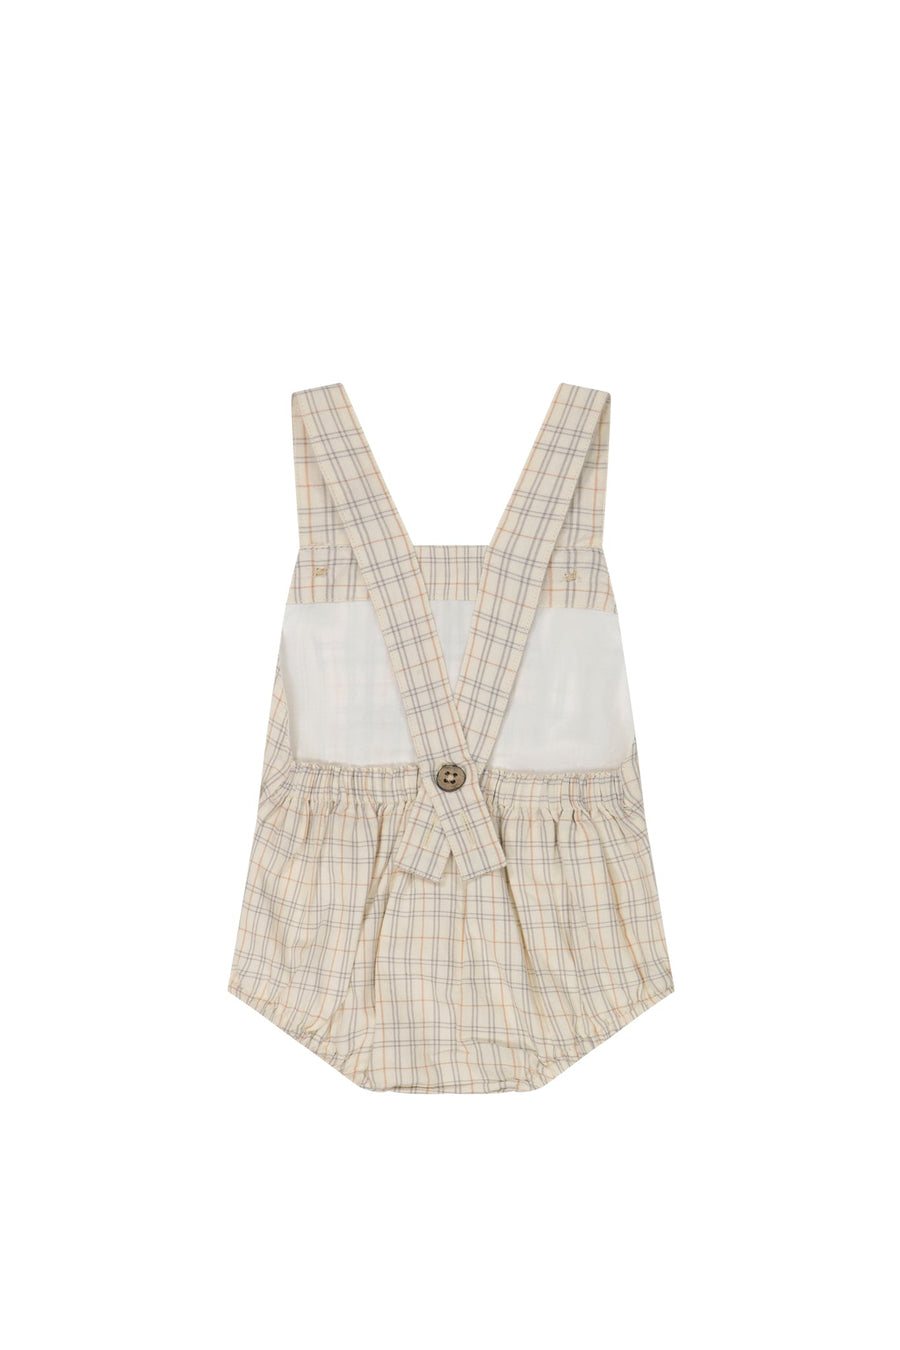 Organic Cotton Samy Playsuit - Billy Check Childrens Playsuit from Jamie Kay USA